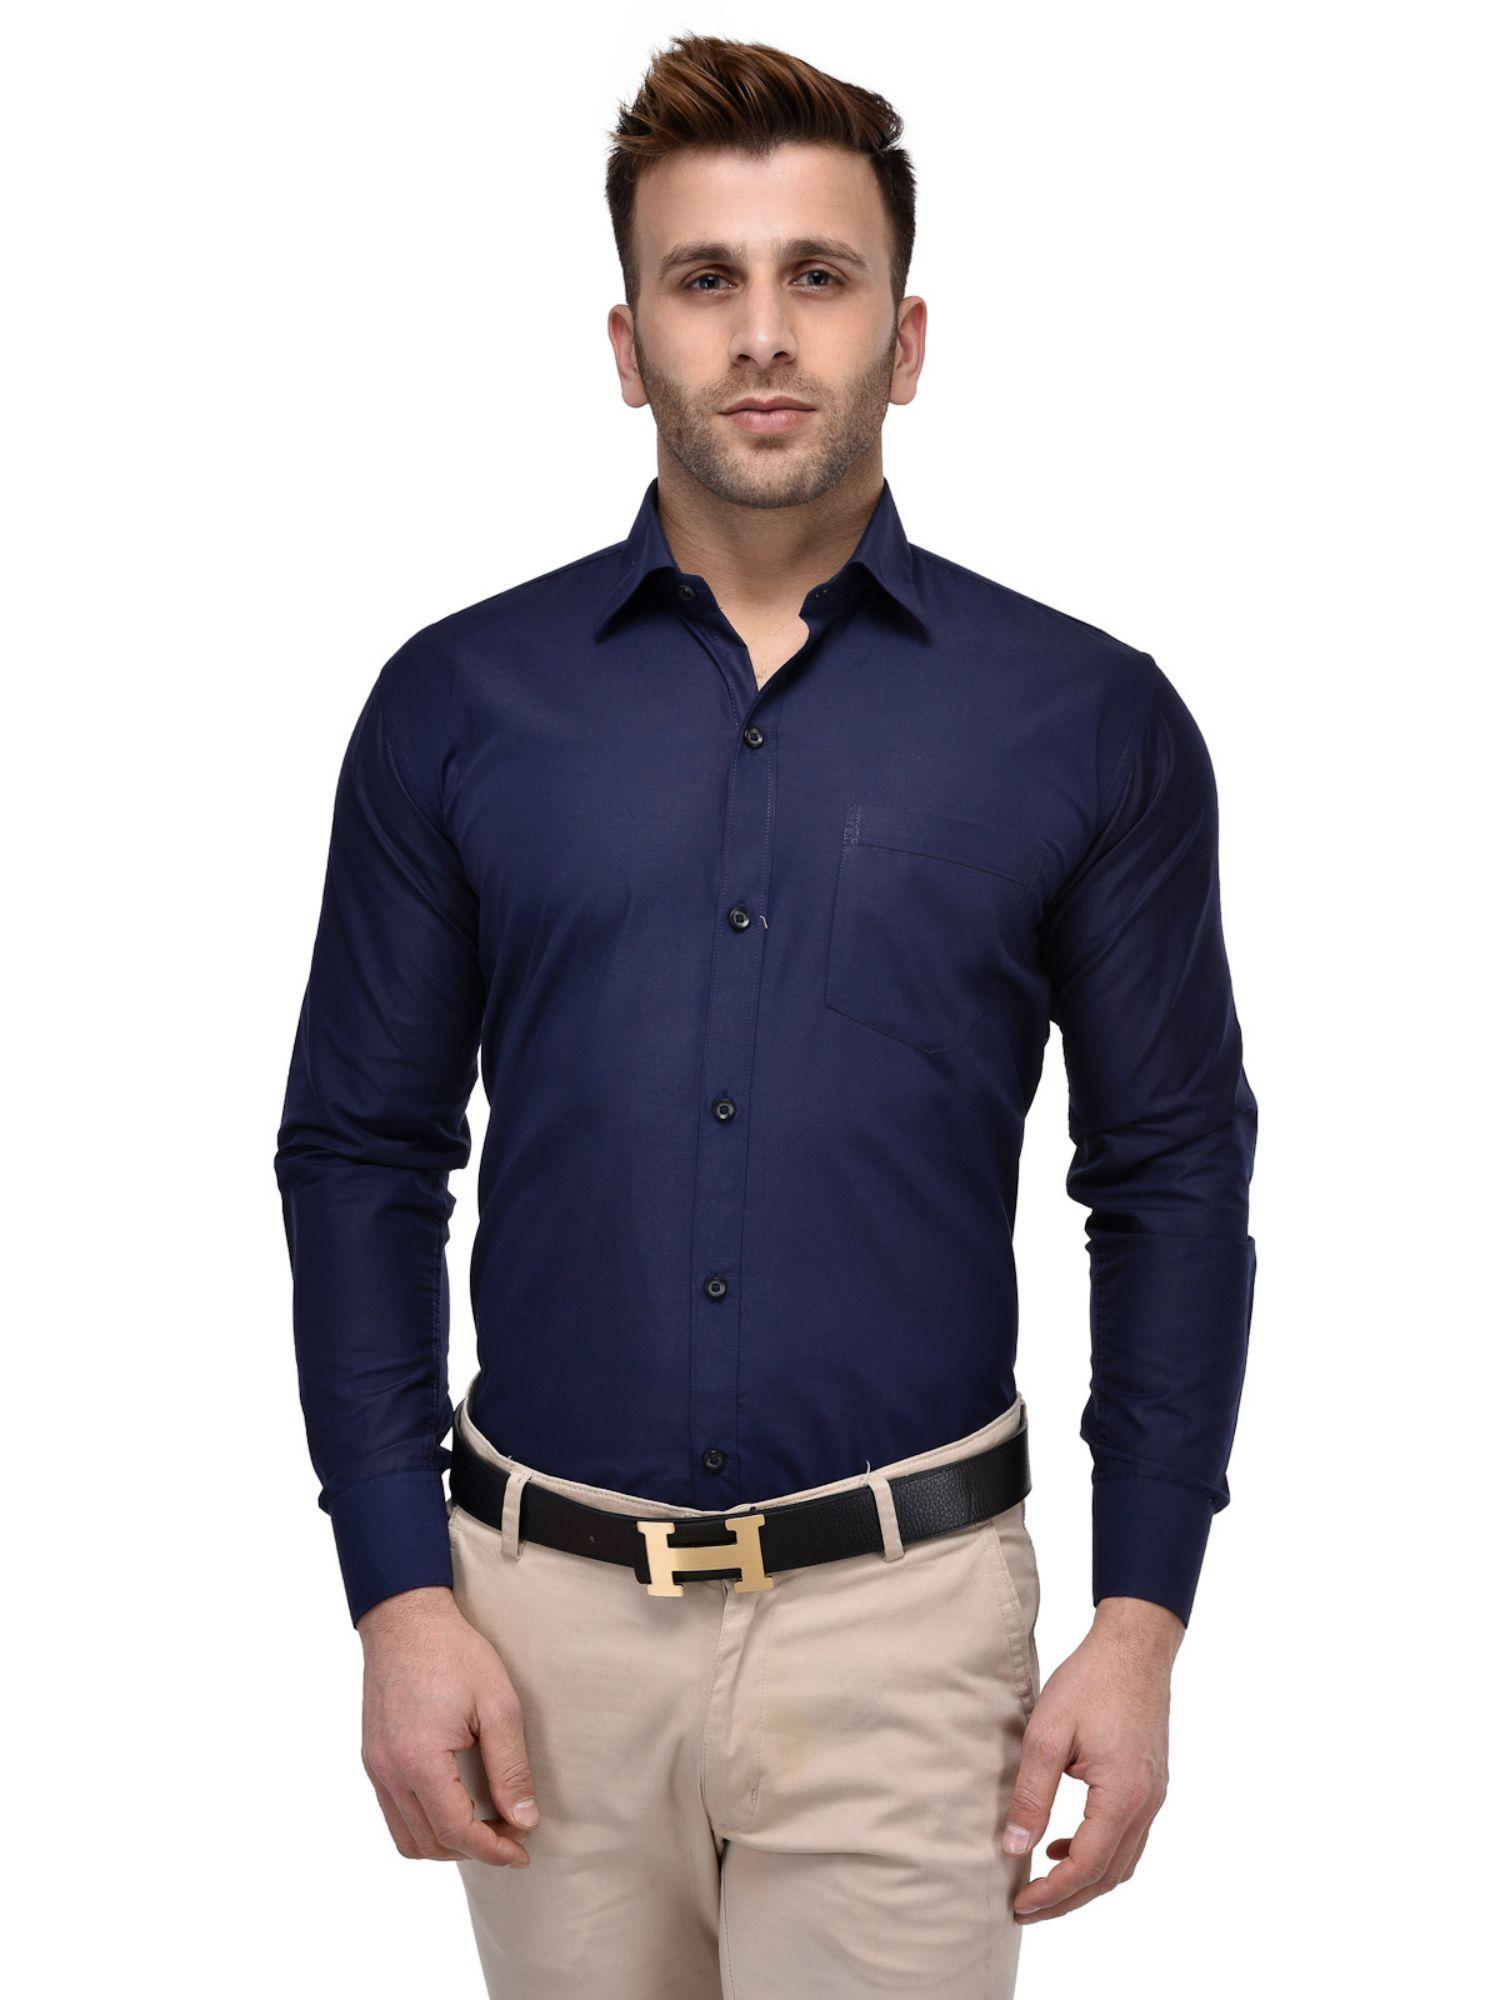 navy-blue-solid-shirt